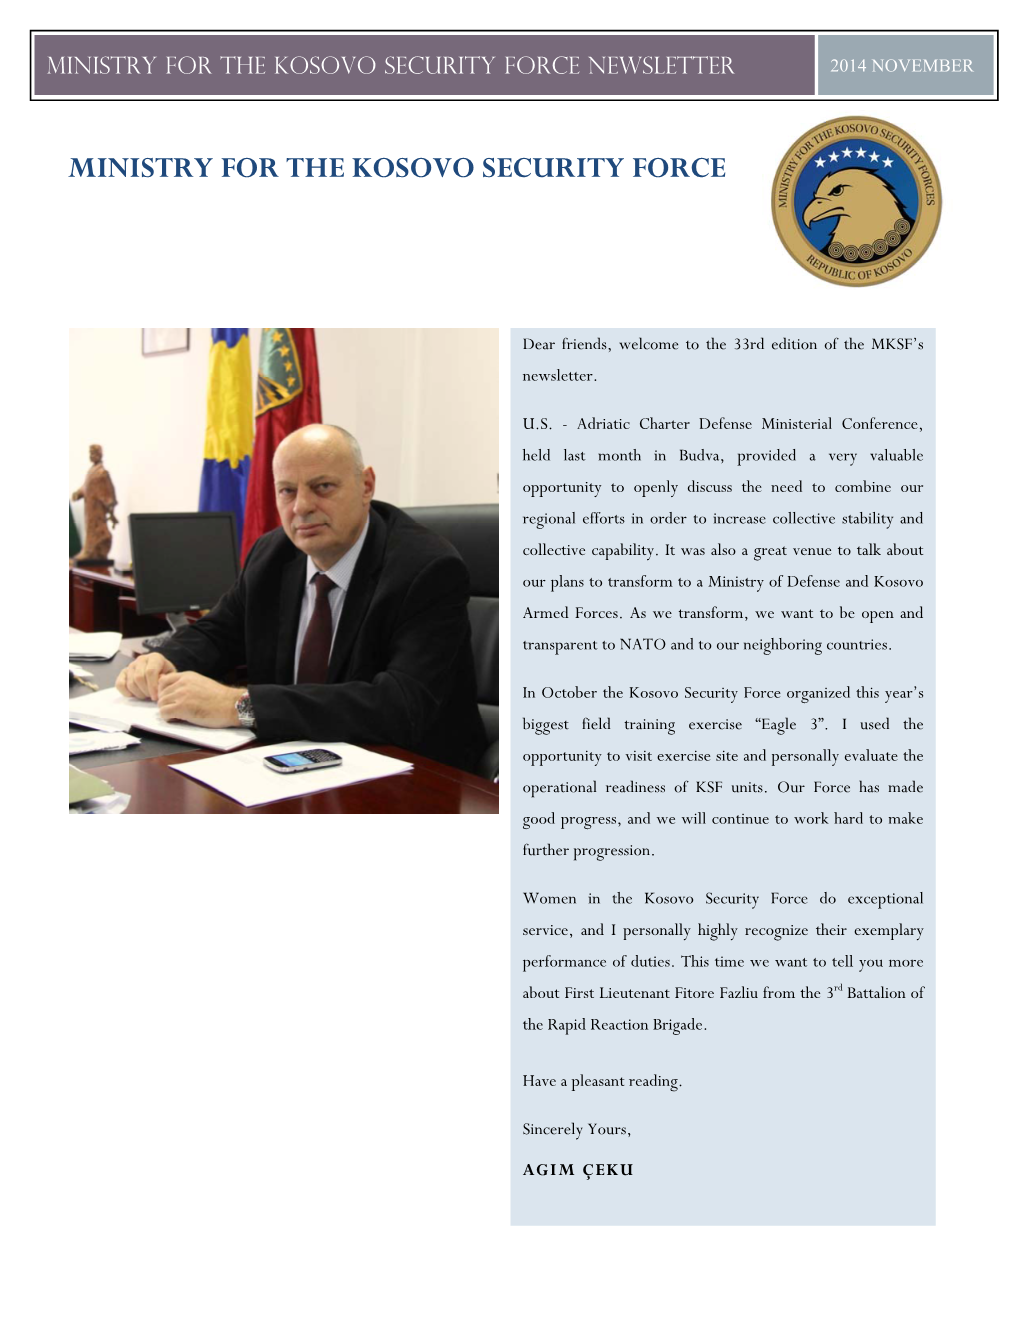 Ministry for the Kosovo Security Force Newsletter 2014 November